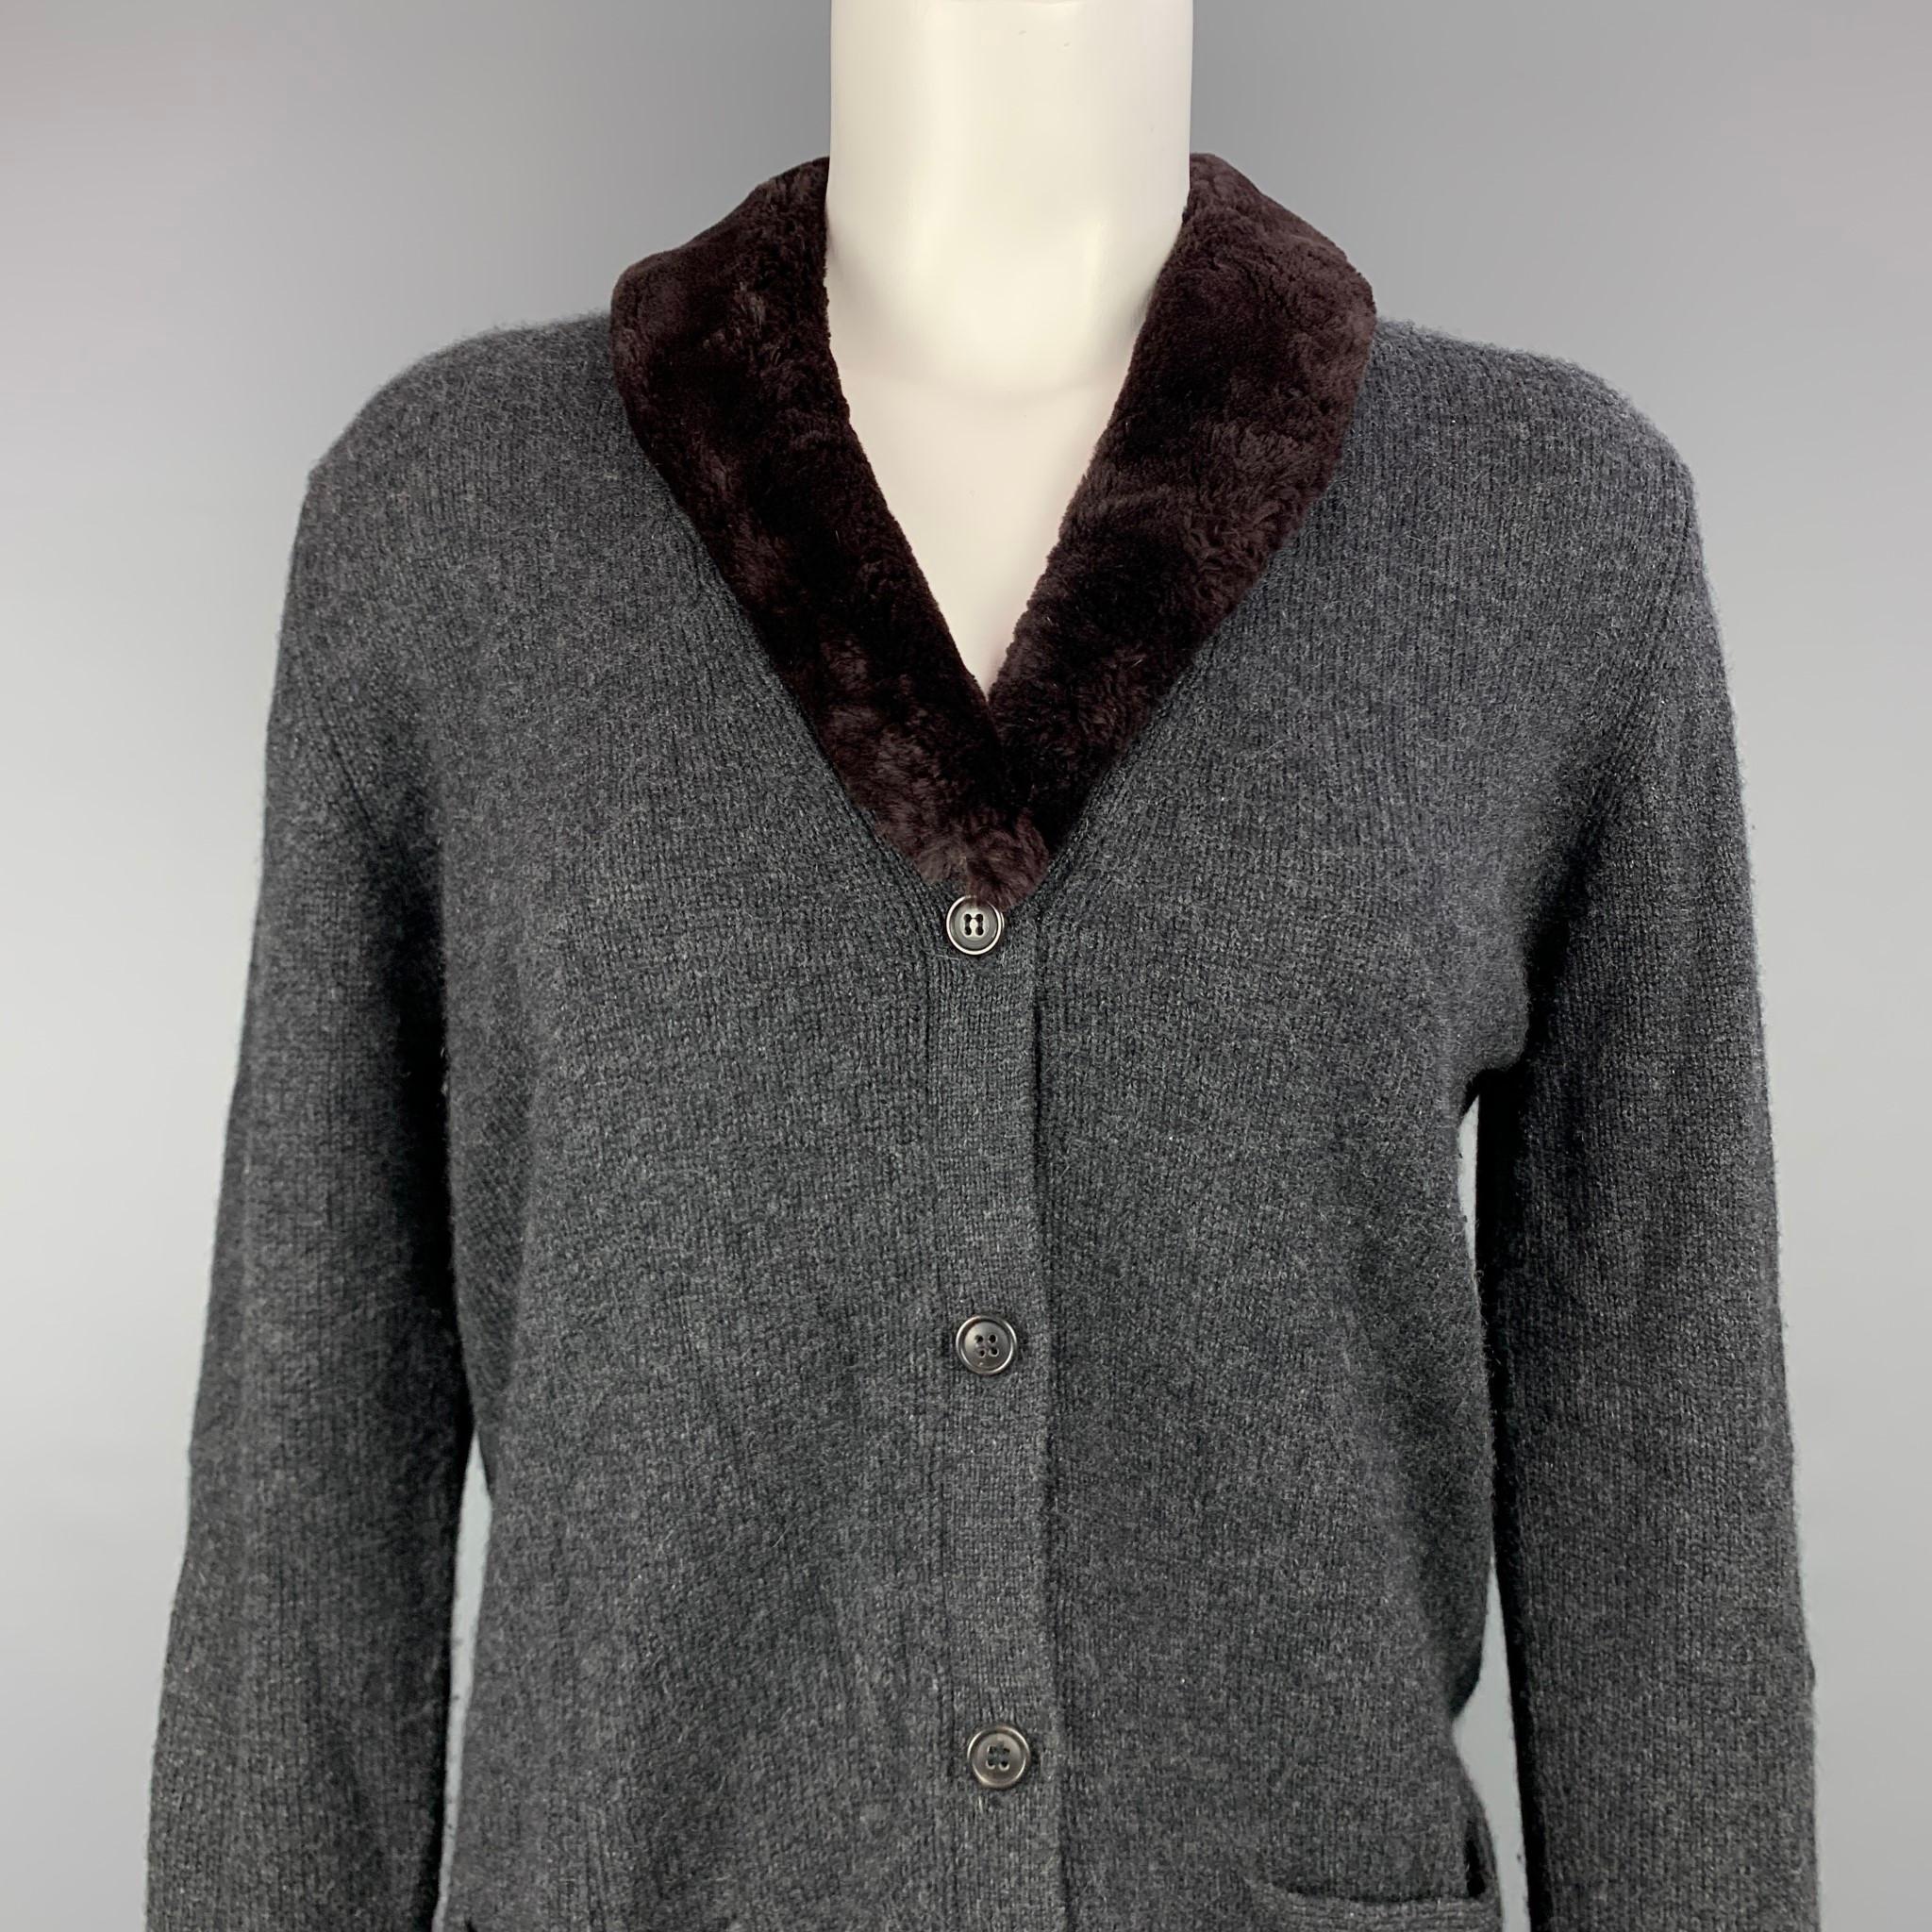 TSE cardigan comes in a charcoal knitted cashmere featuring a fur trim, front pockets, and a buttoned closure.

Very Good Pre-Owned Condition.
Marked: S

Measurements:

Shoulder: 16 in.
Bust: 40 in.
Sleeve: 26 in.
Length: 25 in. 